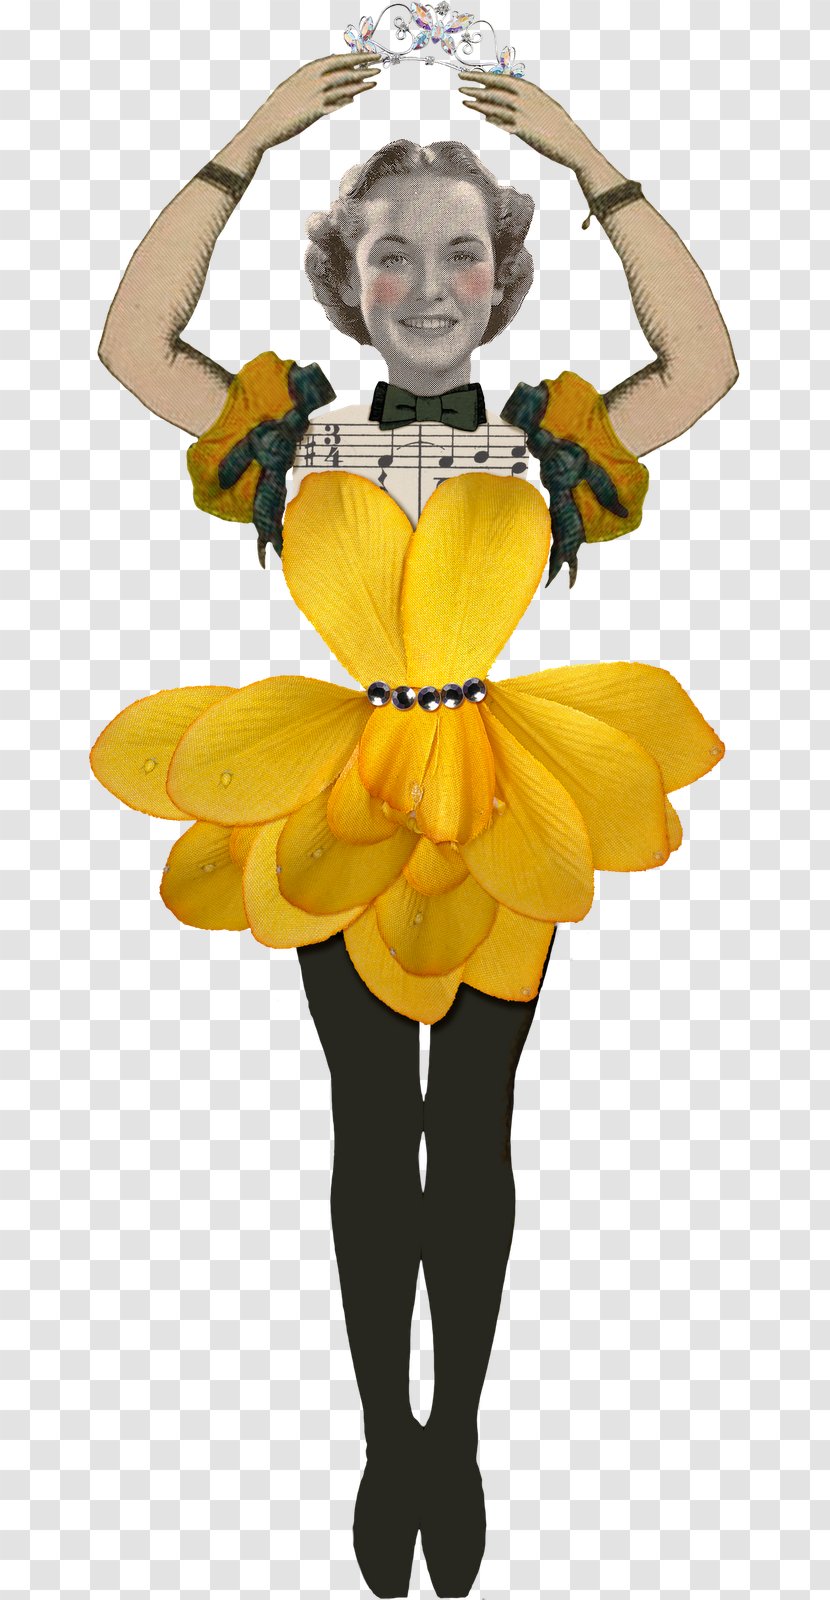 Honey Bee Costume Headgear - Dancer - Have Fun Together! Transparent PNG